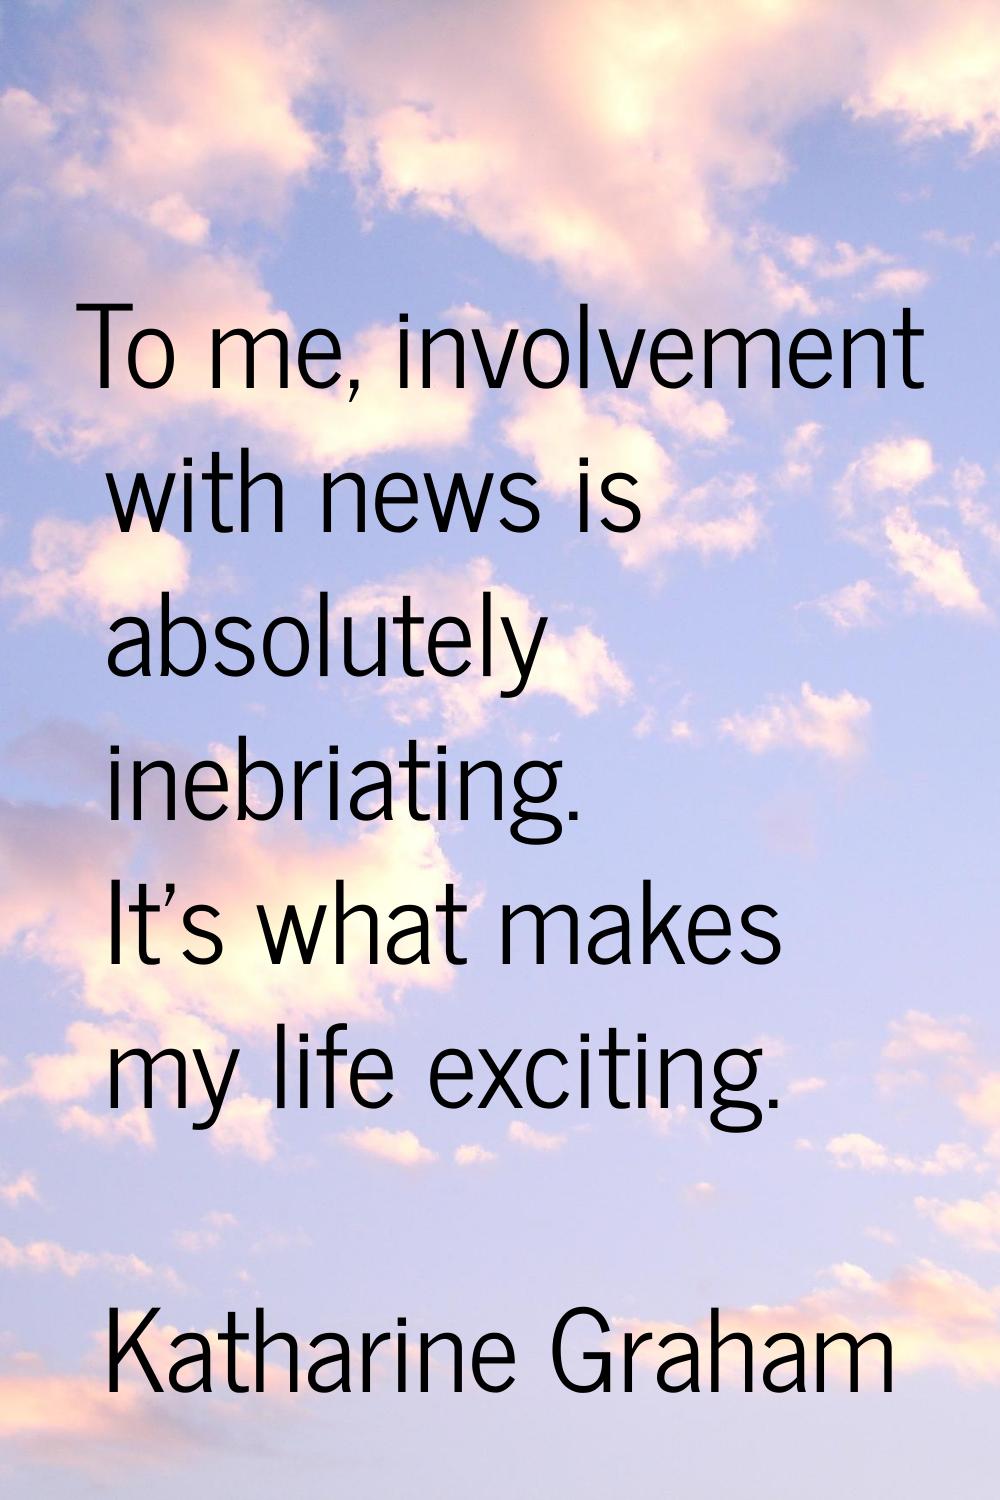 To me, involvement with news is absolutely inebriating. It's what makes my life exciting.